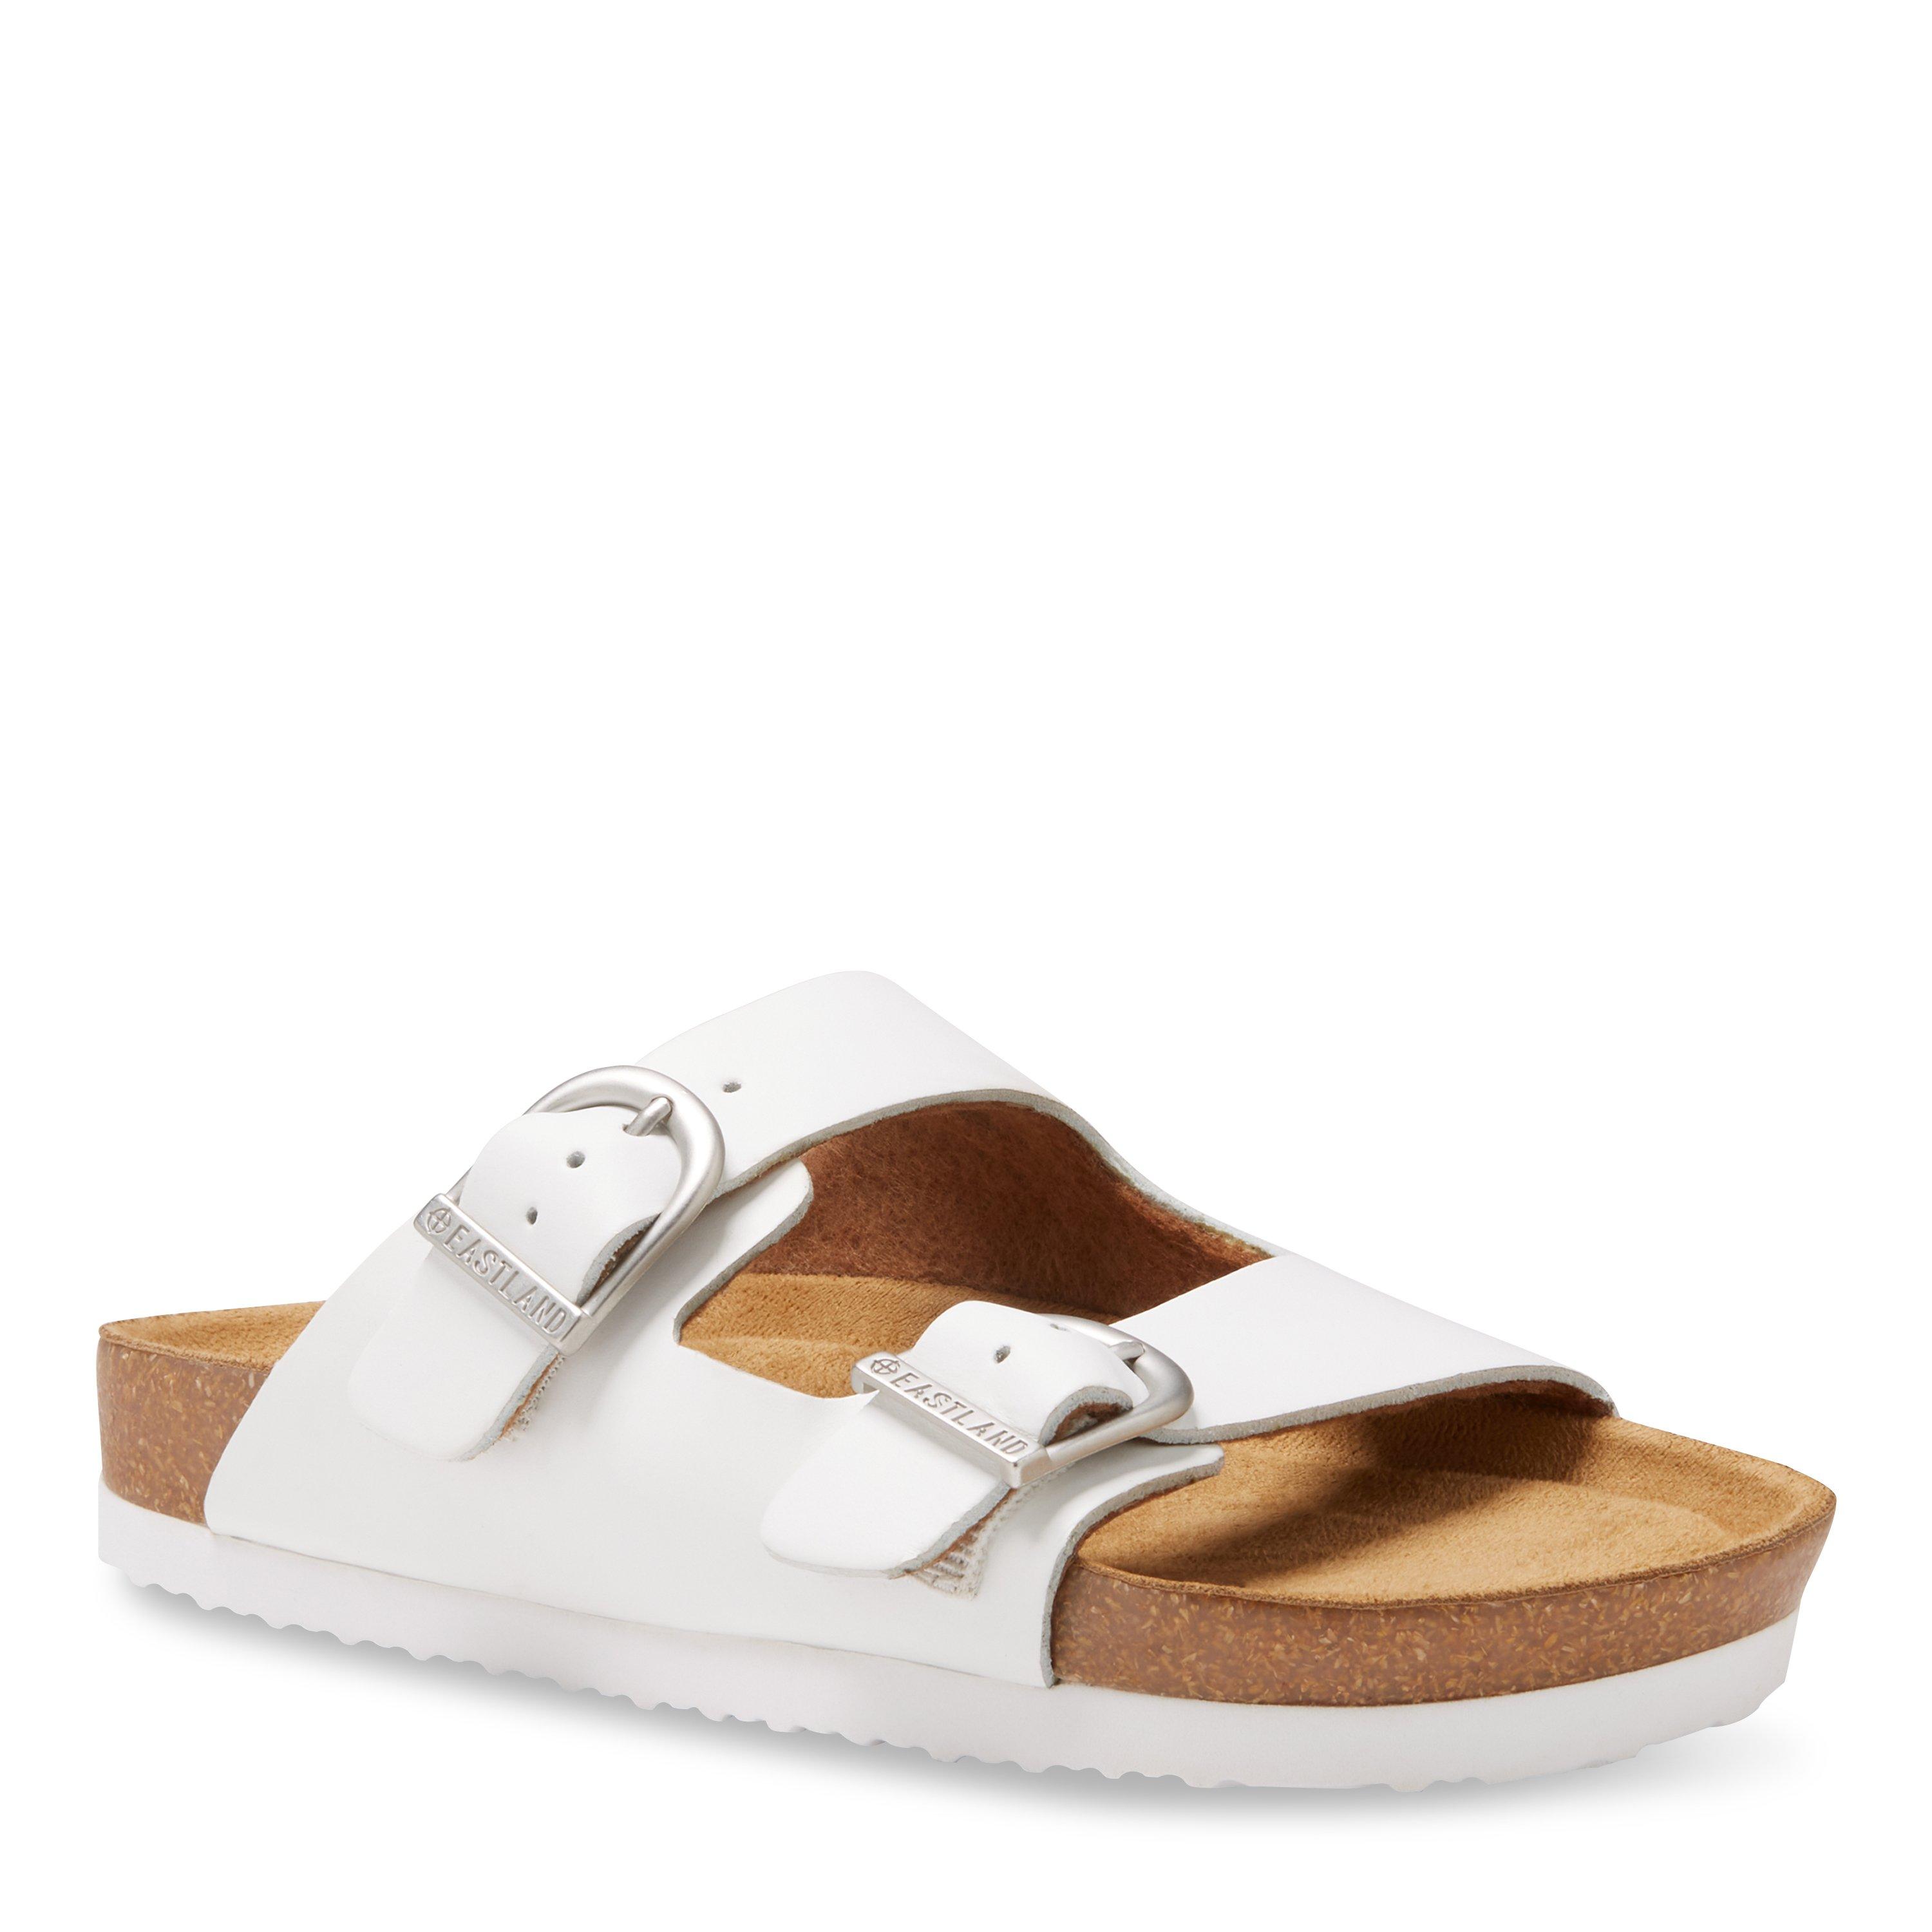 Eastland WomensCambridge Double Strap with Buckle Sandals